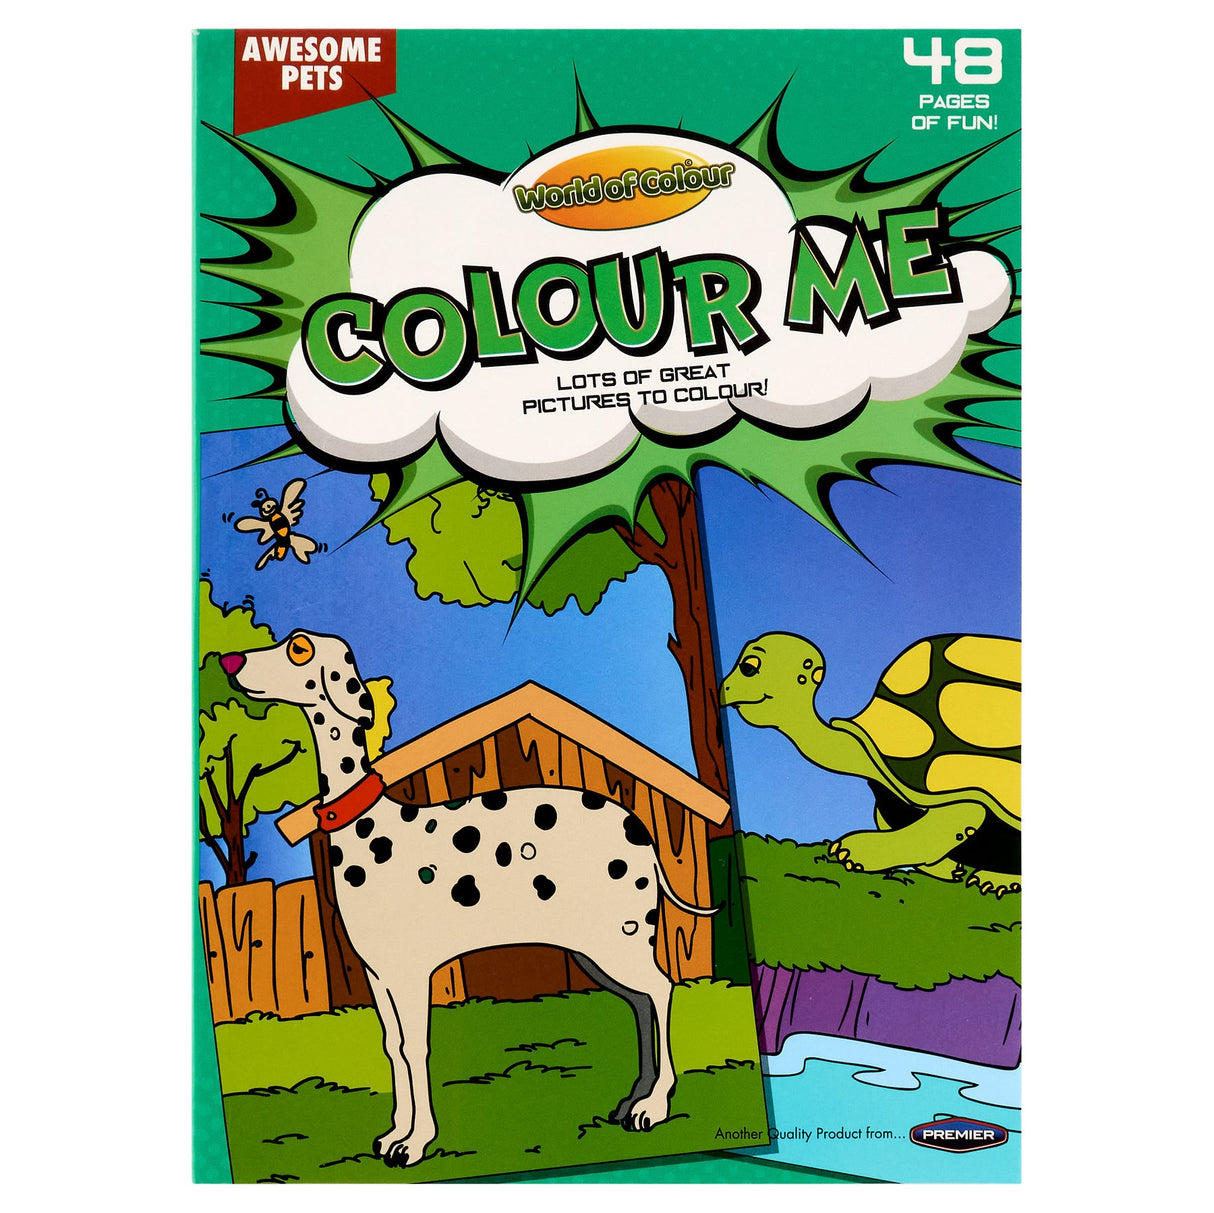 World of Colour A4 Perforated Colour Me Colouring Book - 48 Pages - Awesome Pets | Stationery Shop UK